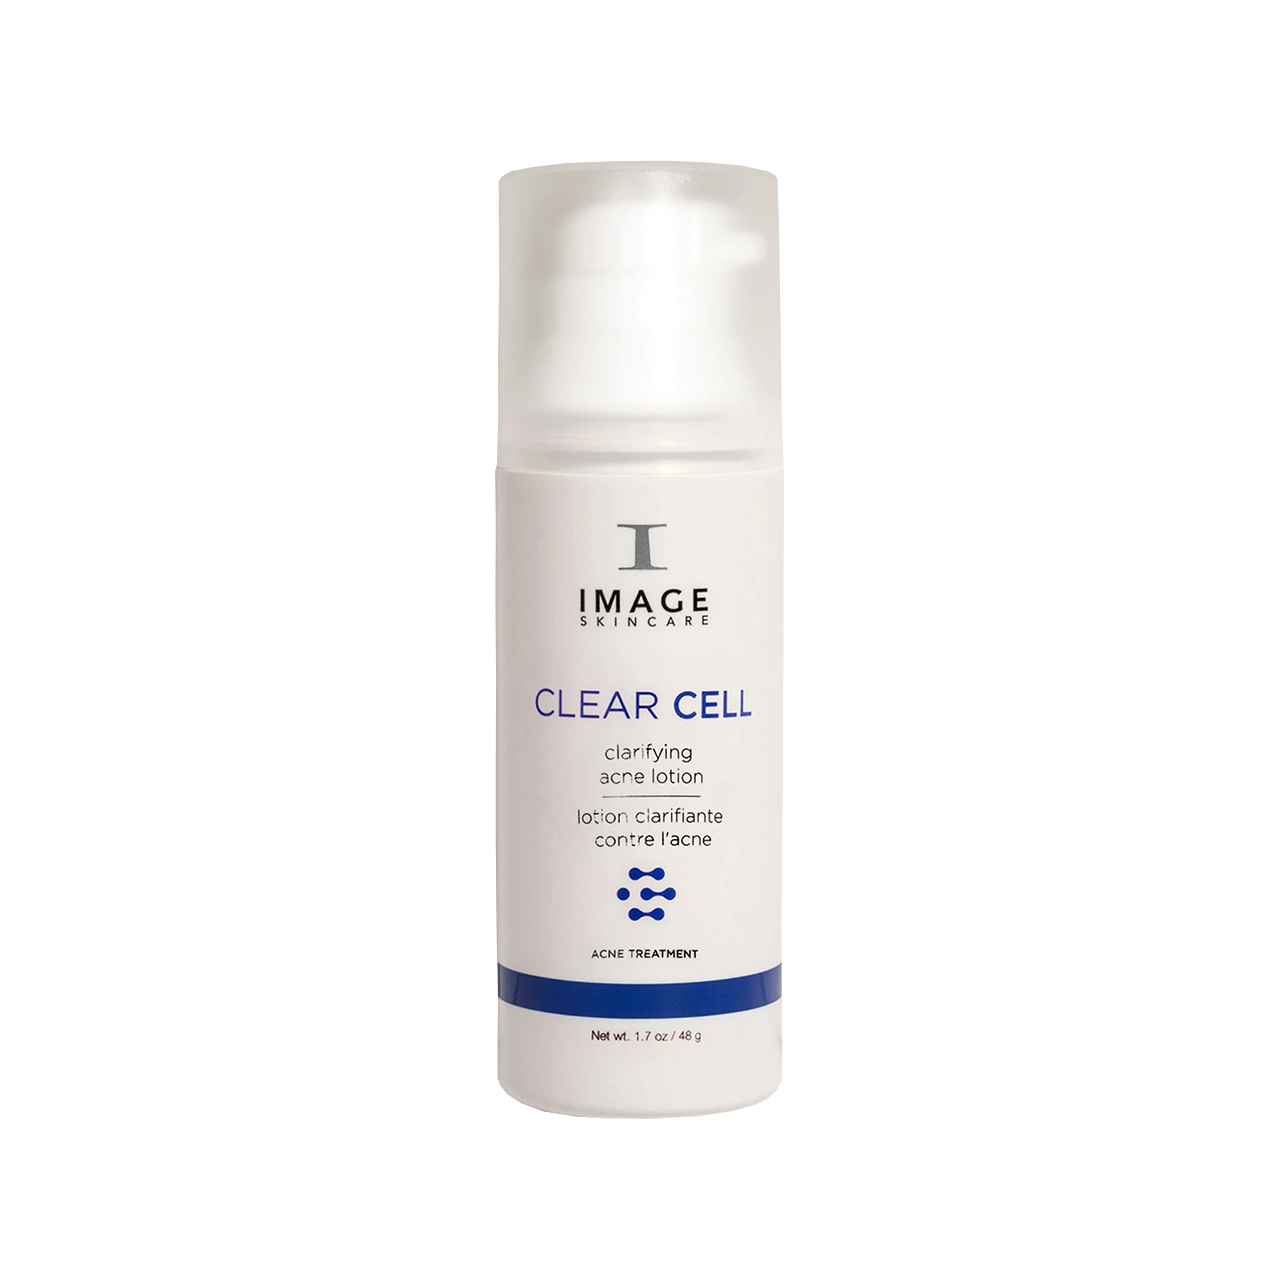 Image Skincare Clear Cell Medicated Acne Lotion - 1.7 oz (CC-201) Questions & Answers